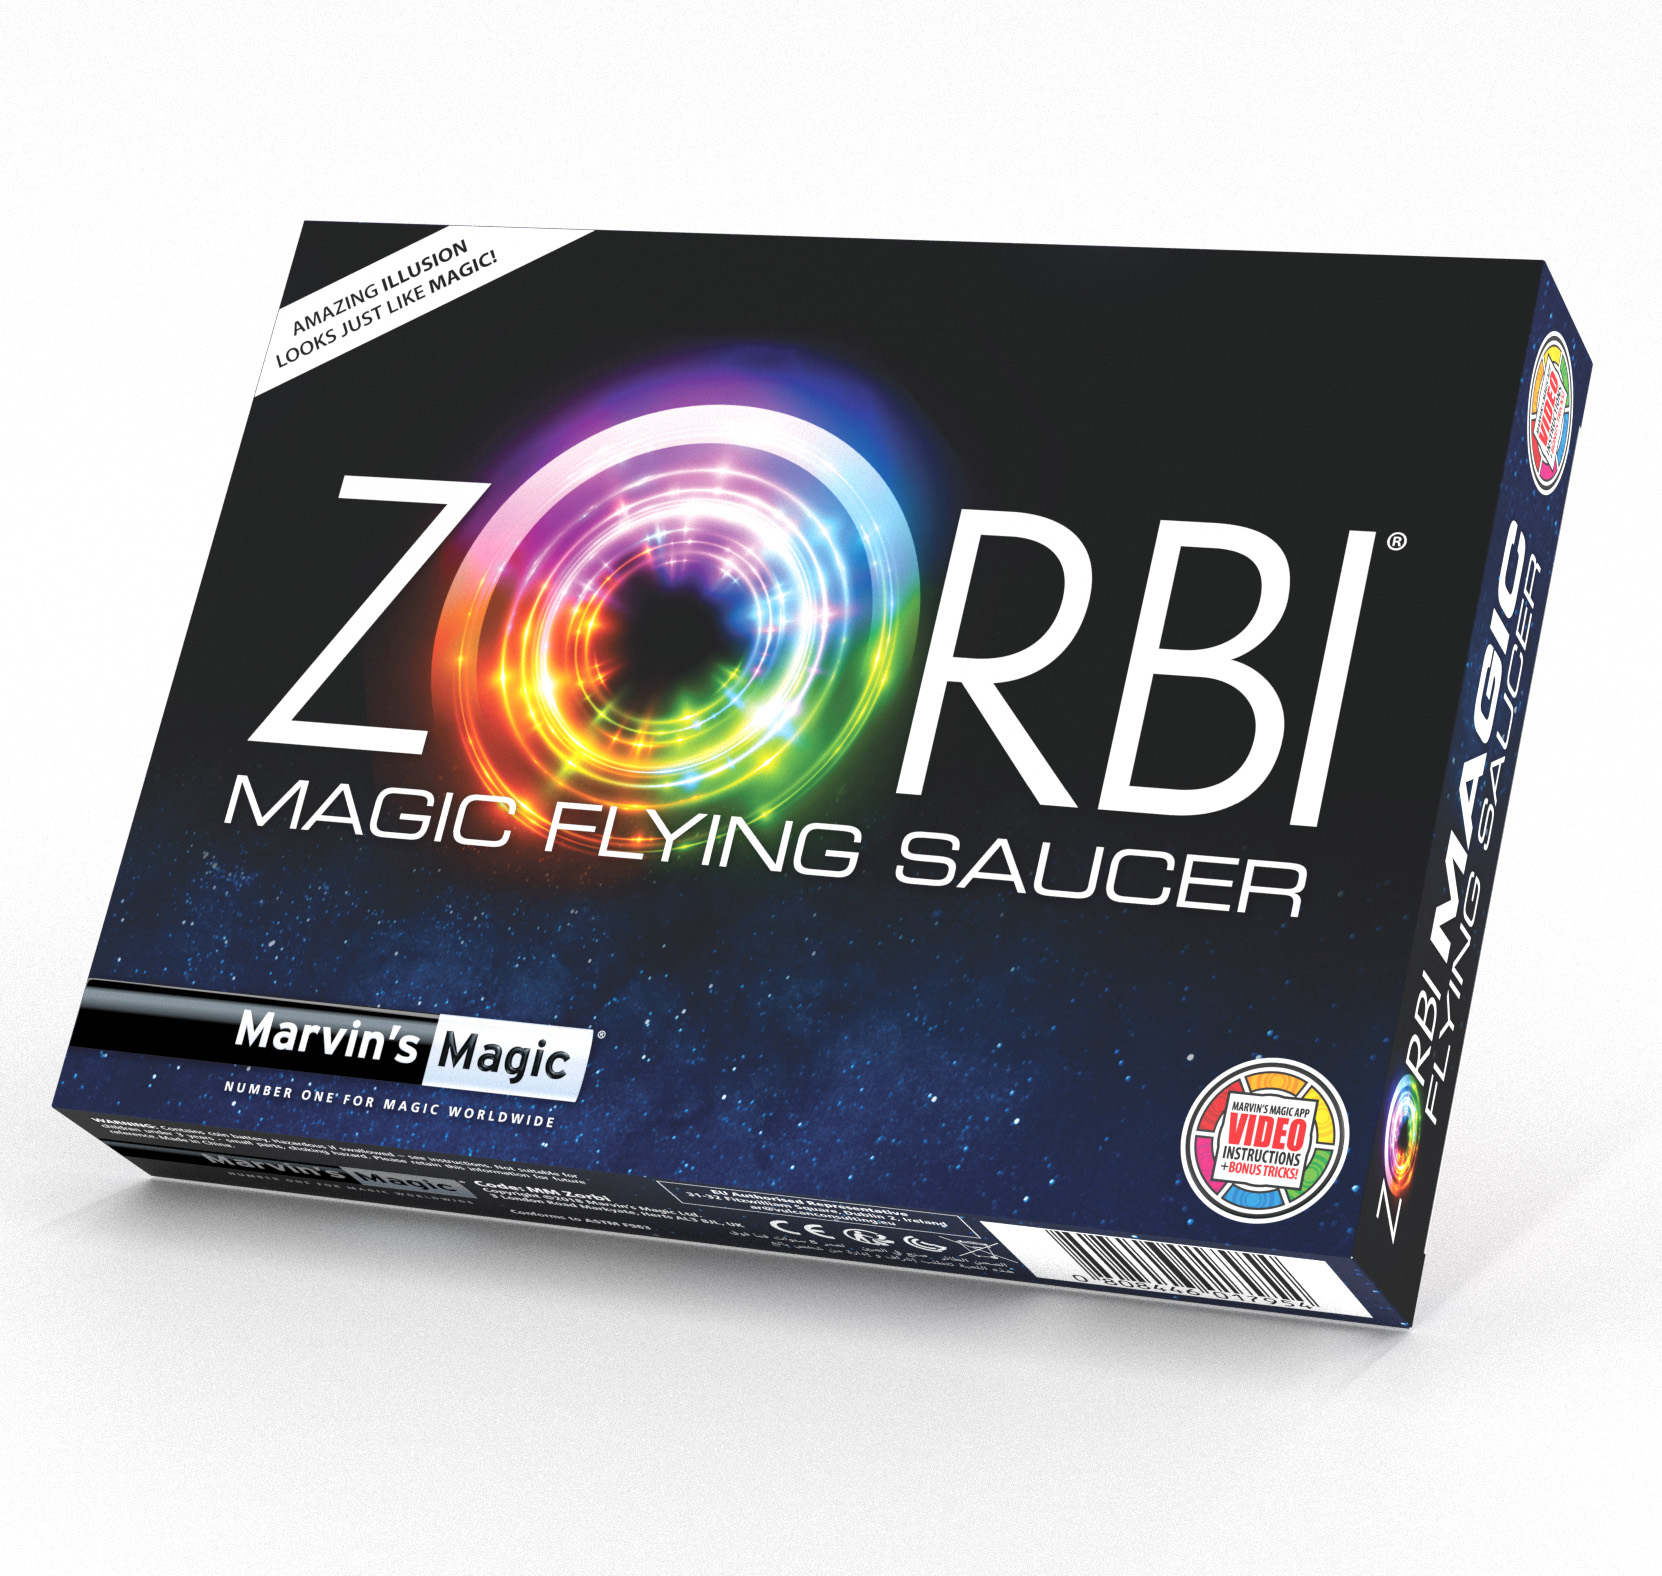 Zorbi Magic Flying Saucer by Marvins Magic